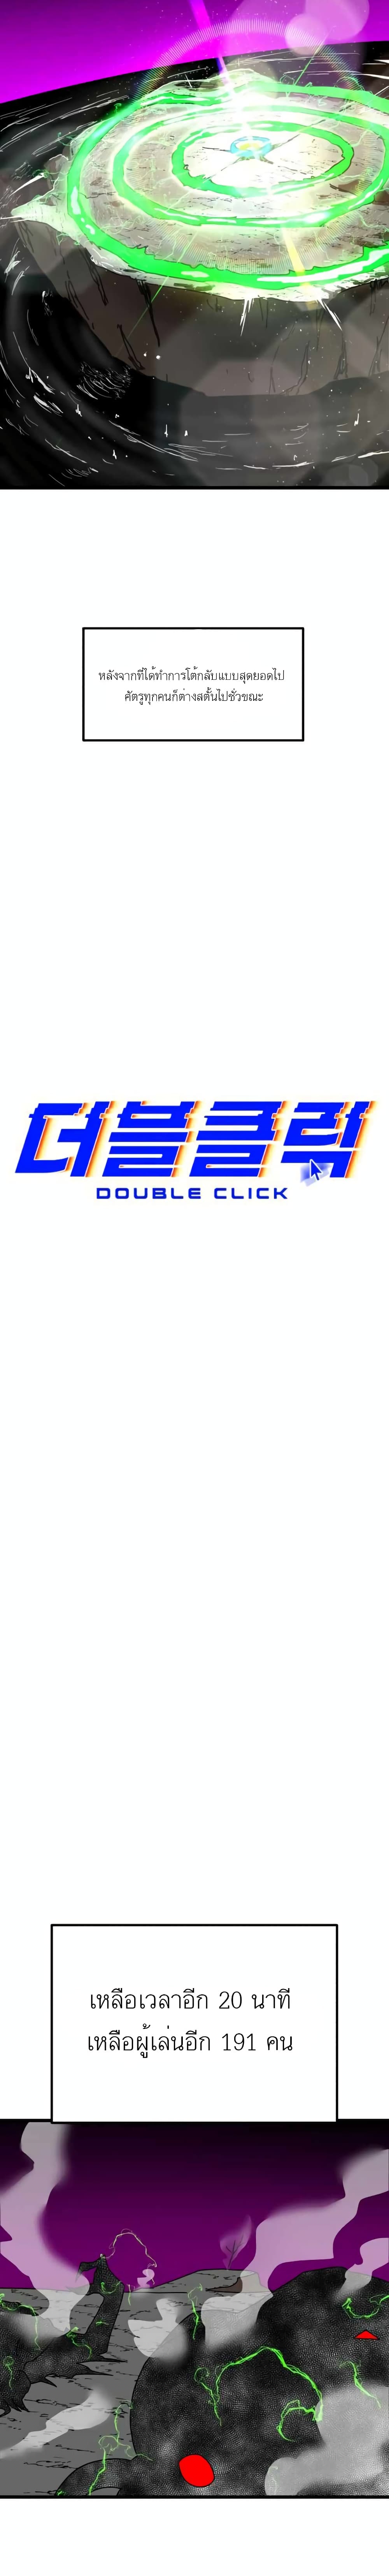 Double Click36 (19)